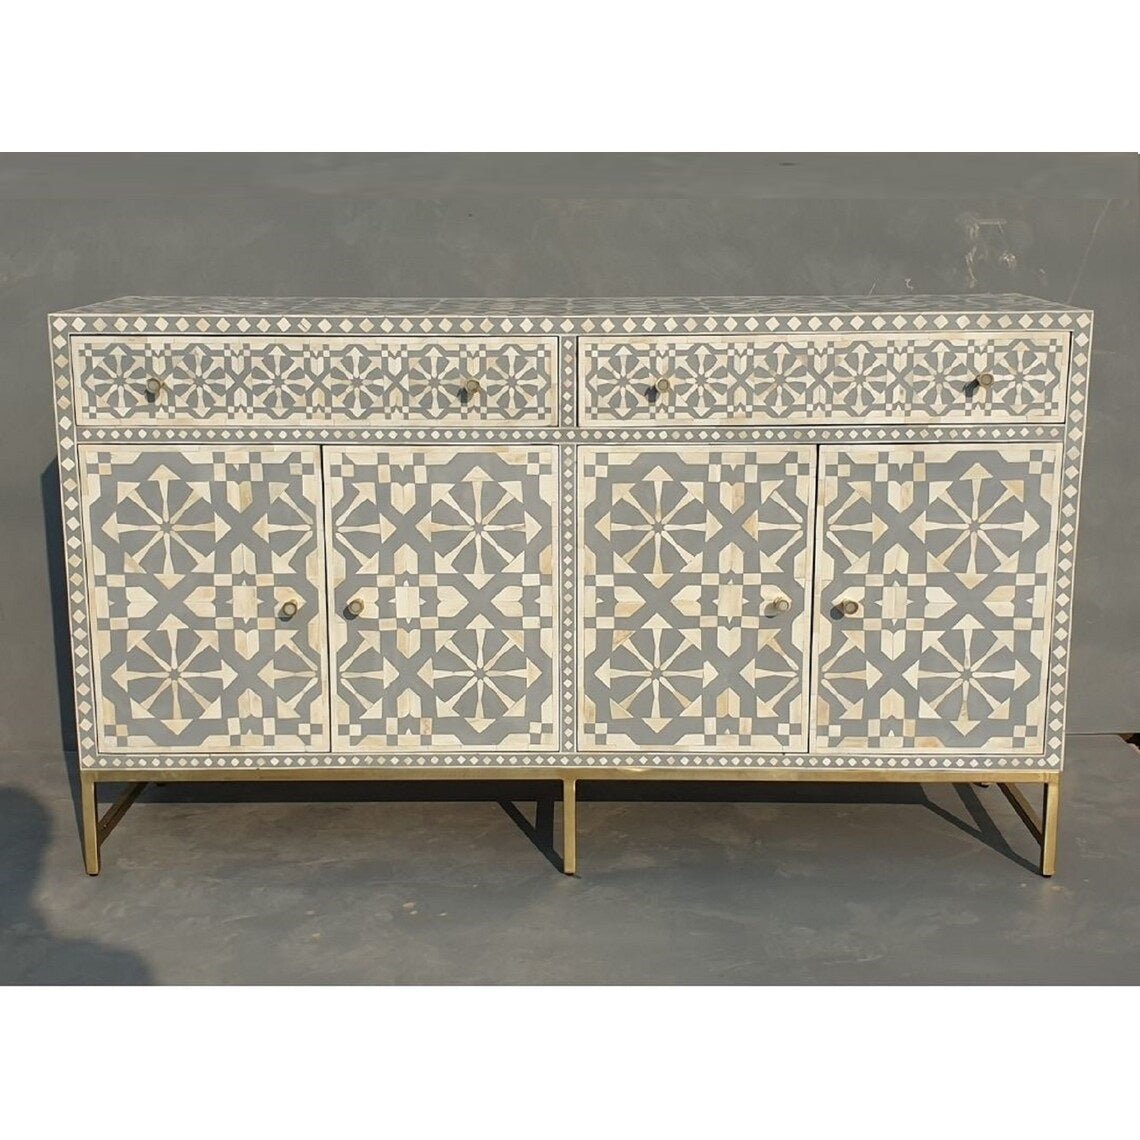 Handmade Bone Inlay Gray and White Color Sideboard | Handmade Bone Inlay Buffet Table Sideboard - Bone Inlay Furnitures